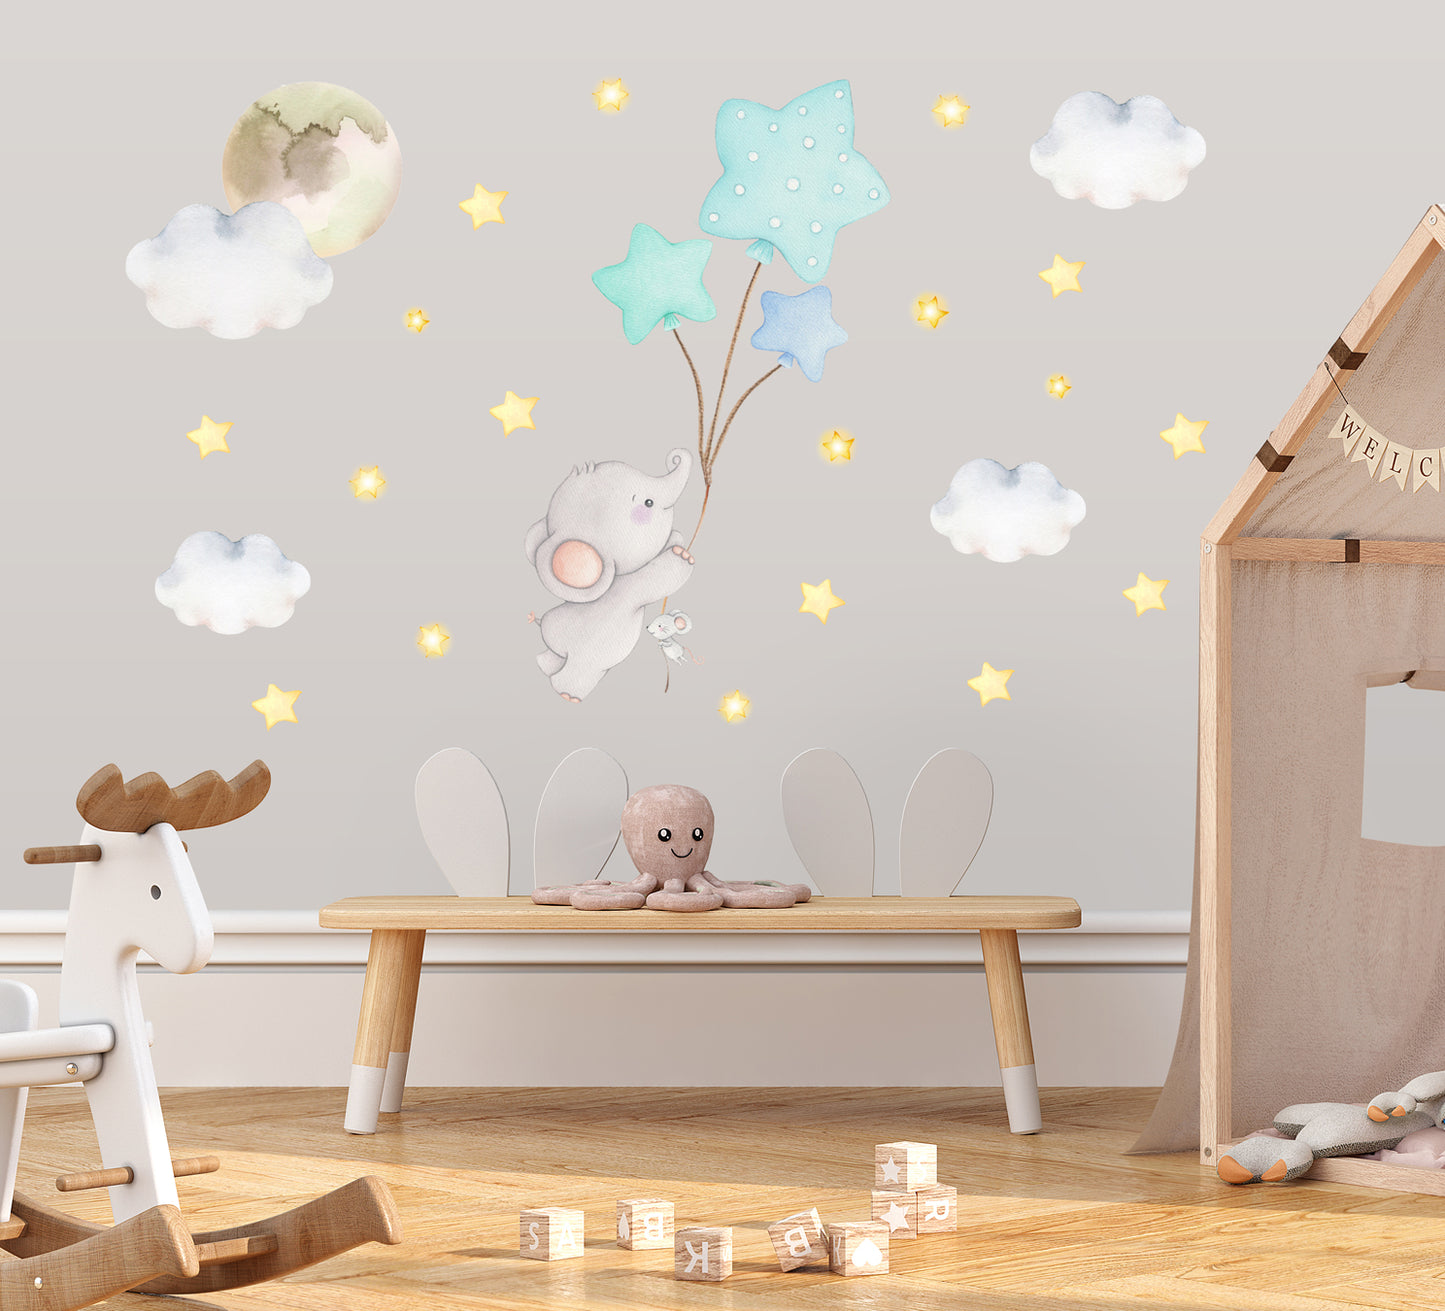 Elephant with balloons. Wall decals for child's room. Clouds and stars.